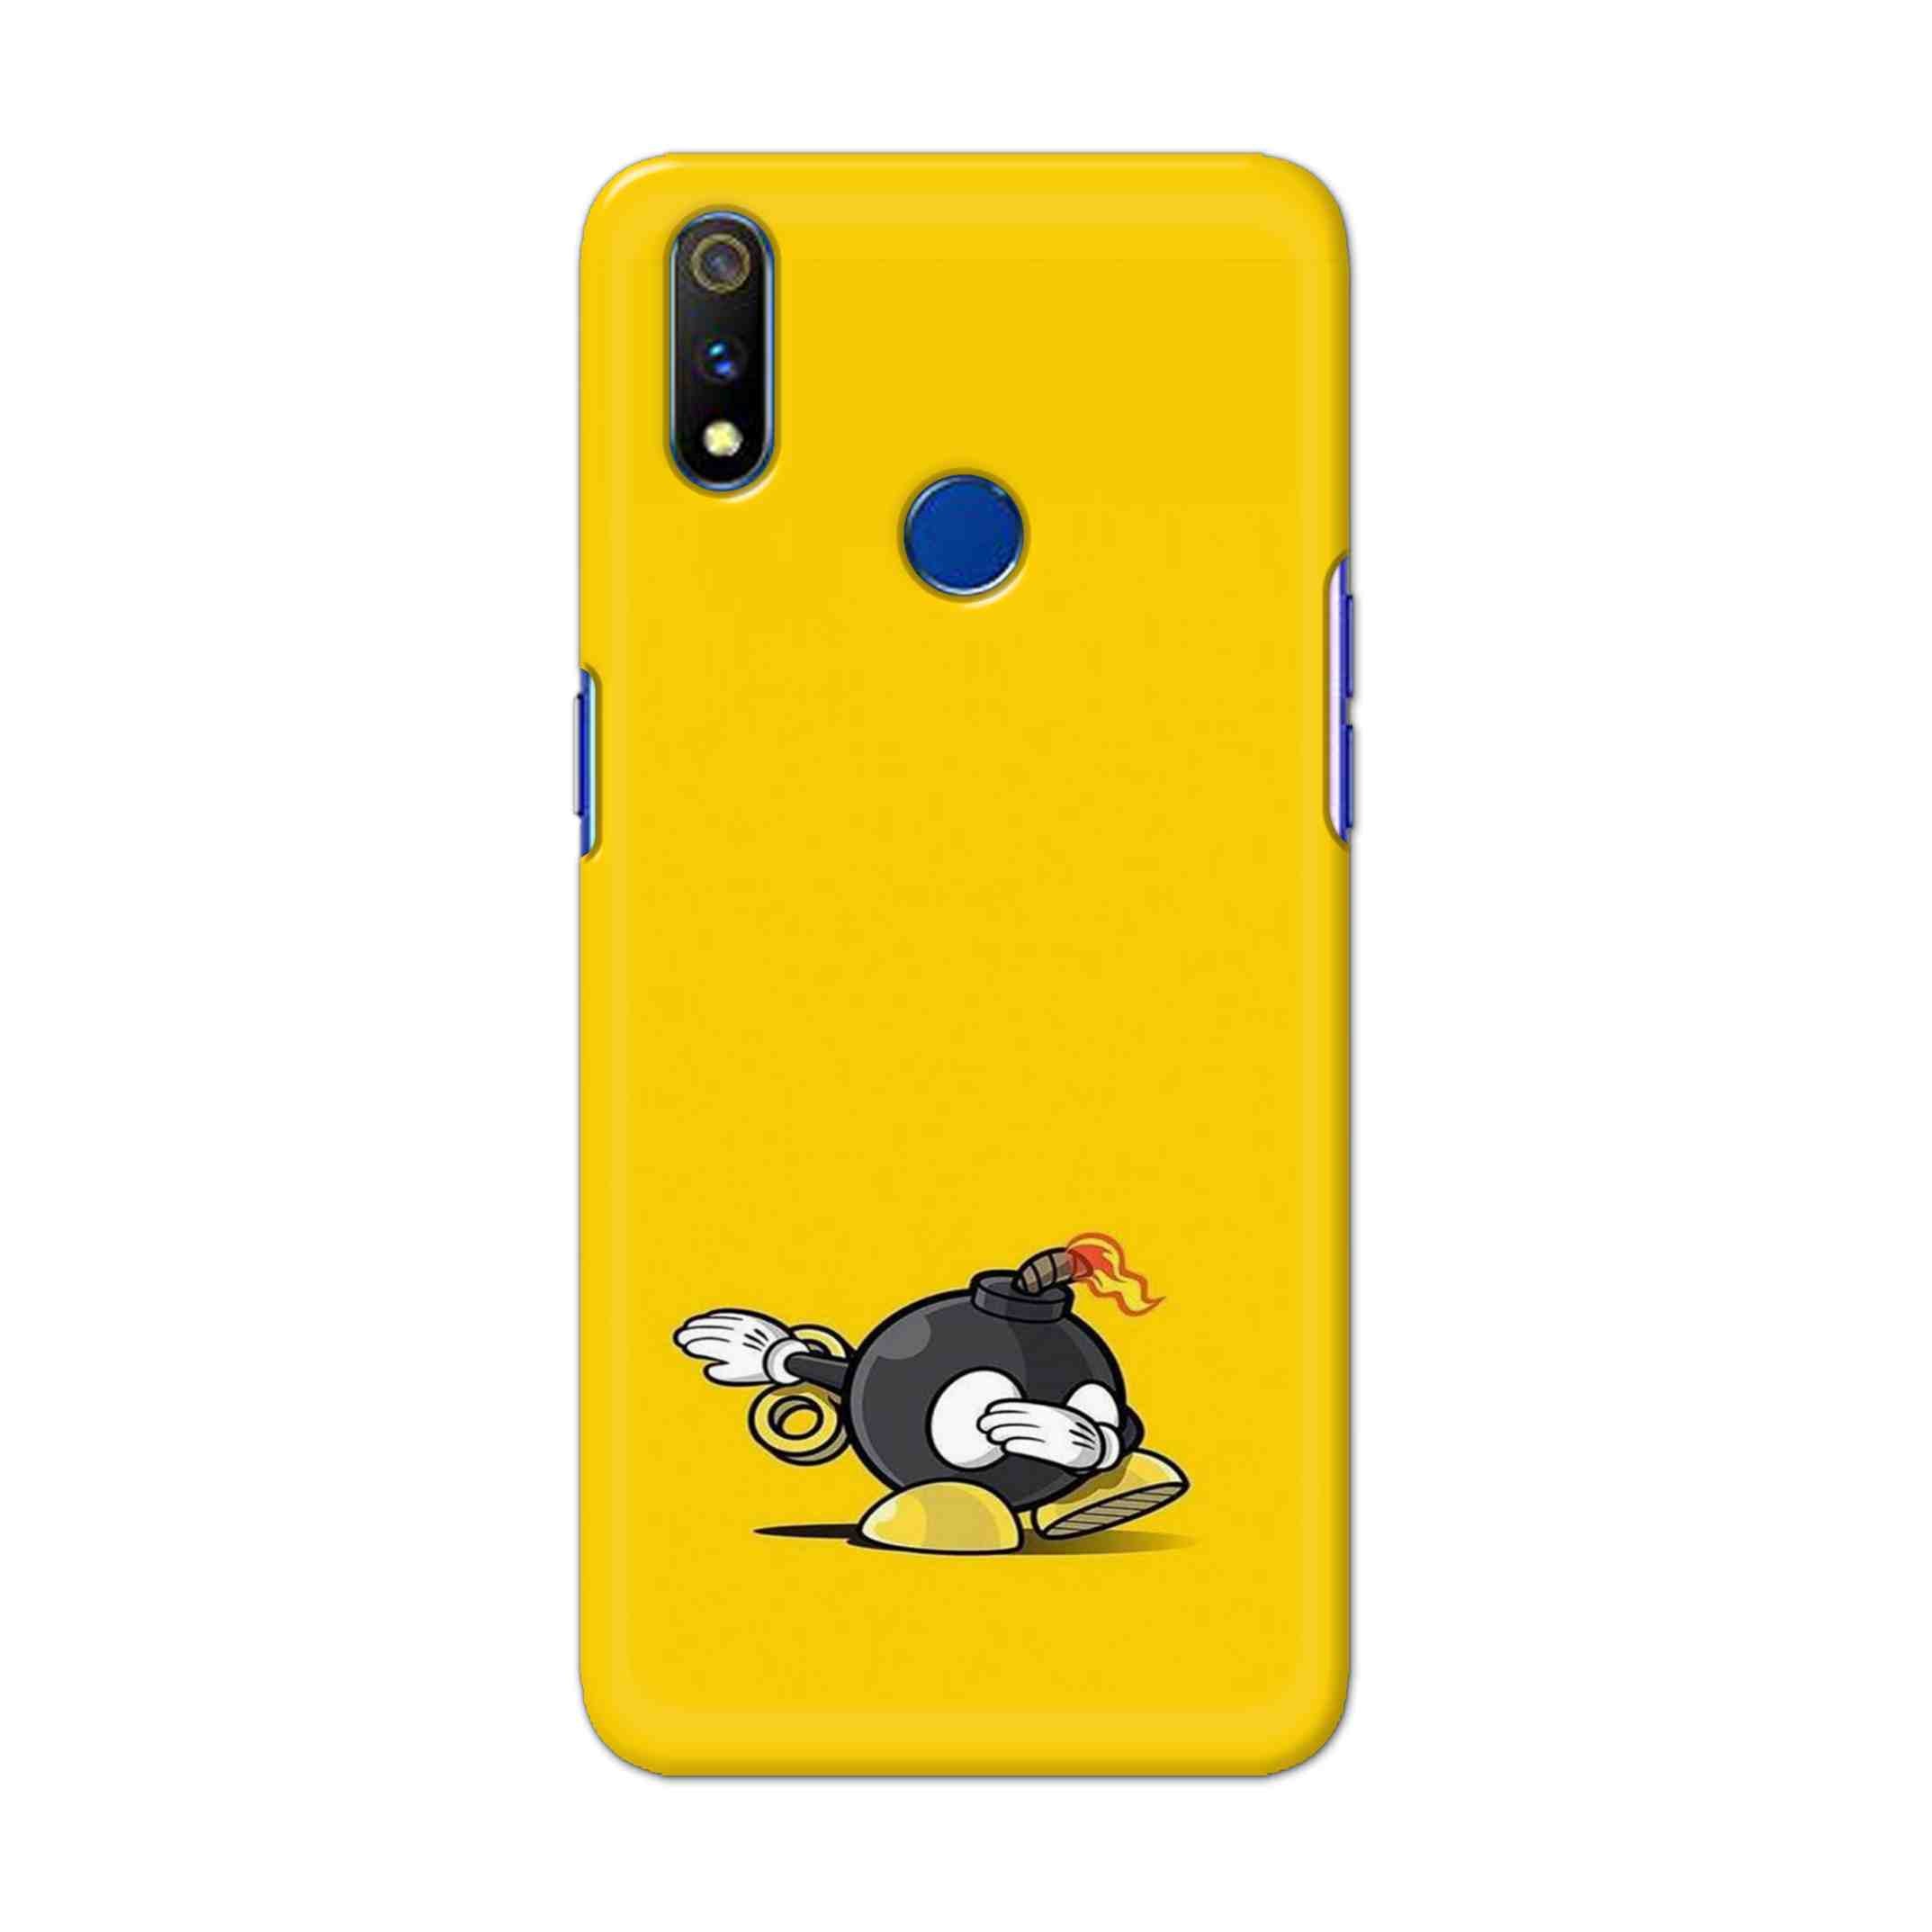 Buy Dashing Bomb Hard Back Mobile Phone Case Cover For Realme 3 Pro Online